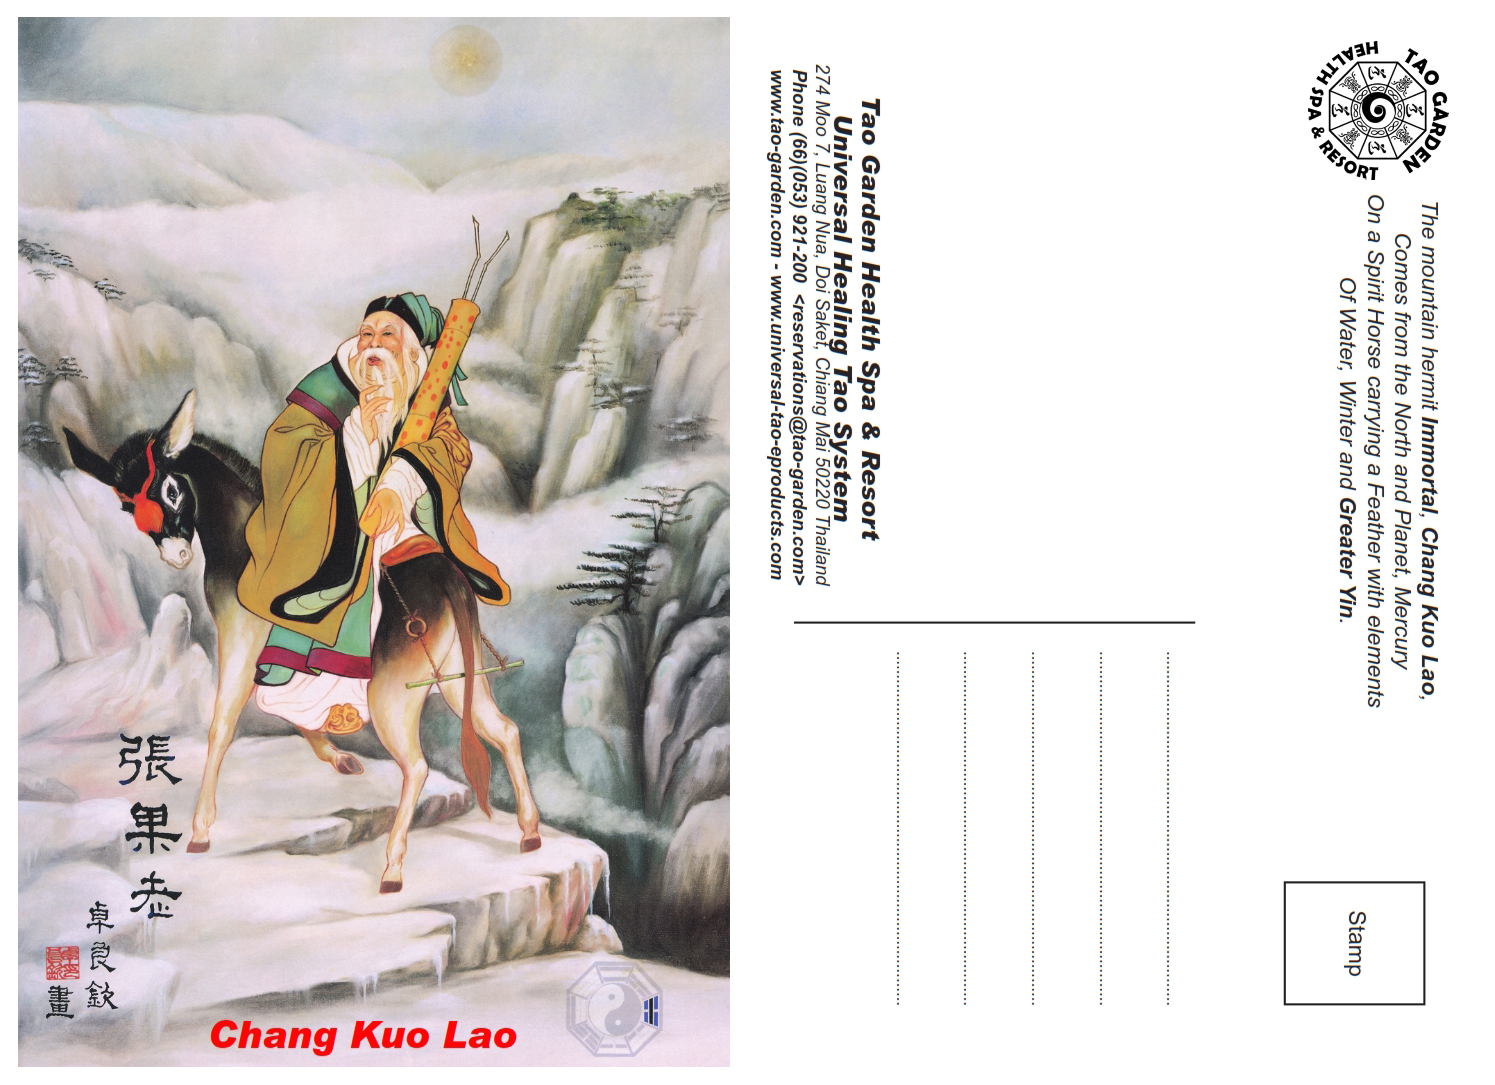 Taoist Immortal, Chang Kuo Lao (E-Post Card) [DL-PC05]